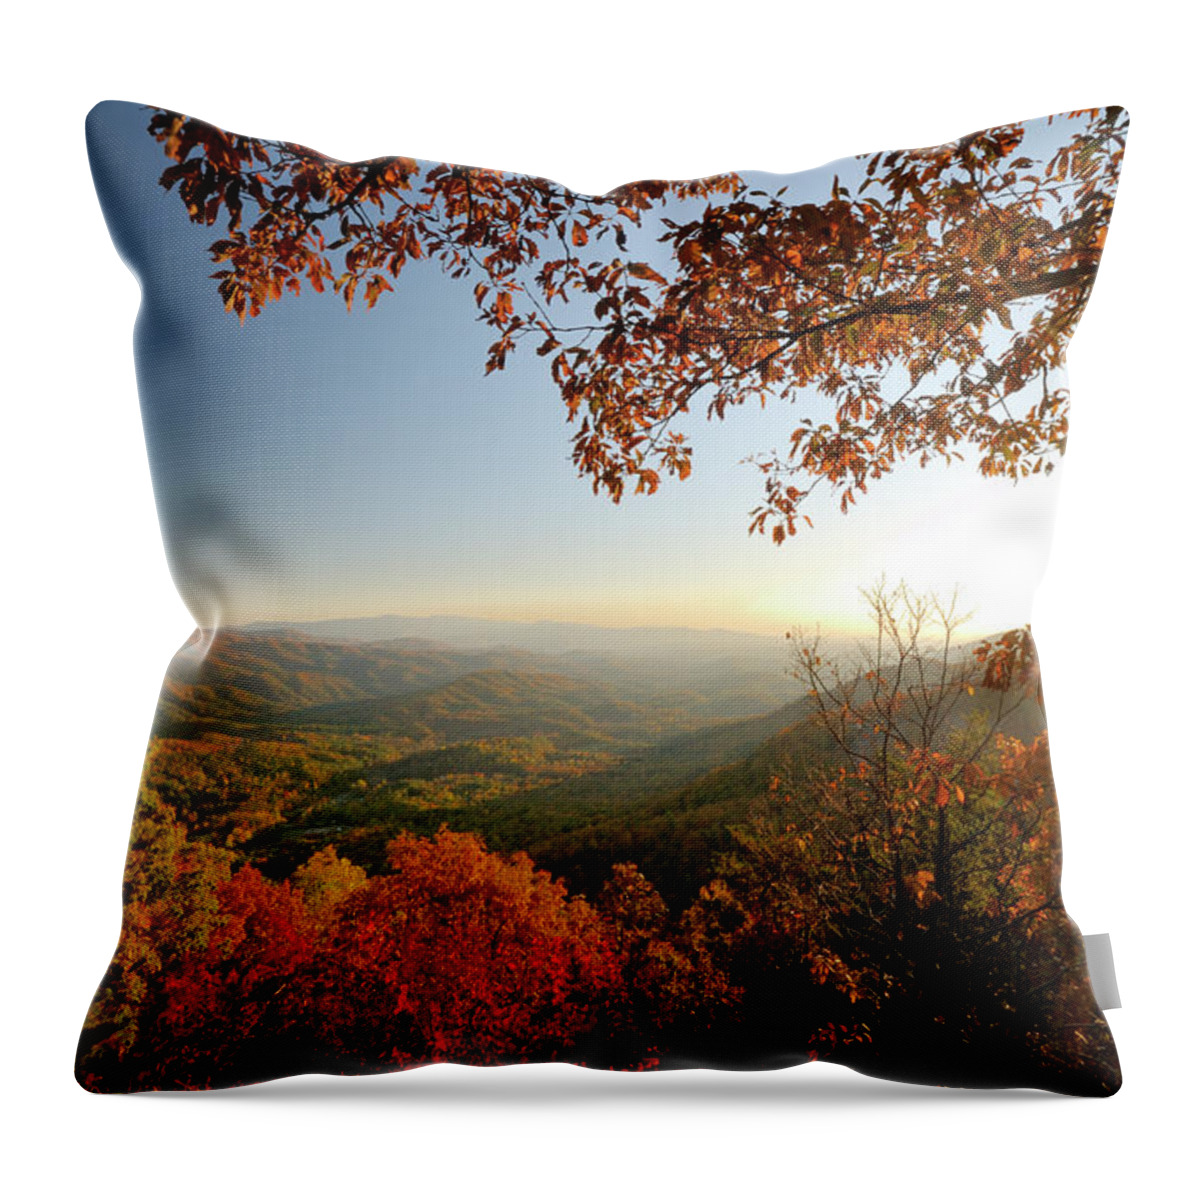 Scenics Throw Pillow featuring the photograph Look Rock Lower Overlook On Foothills by Greenstock